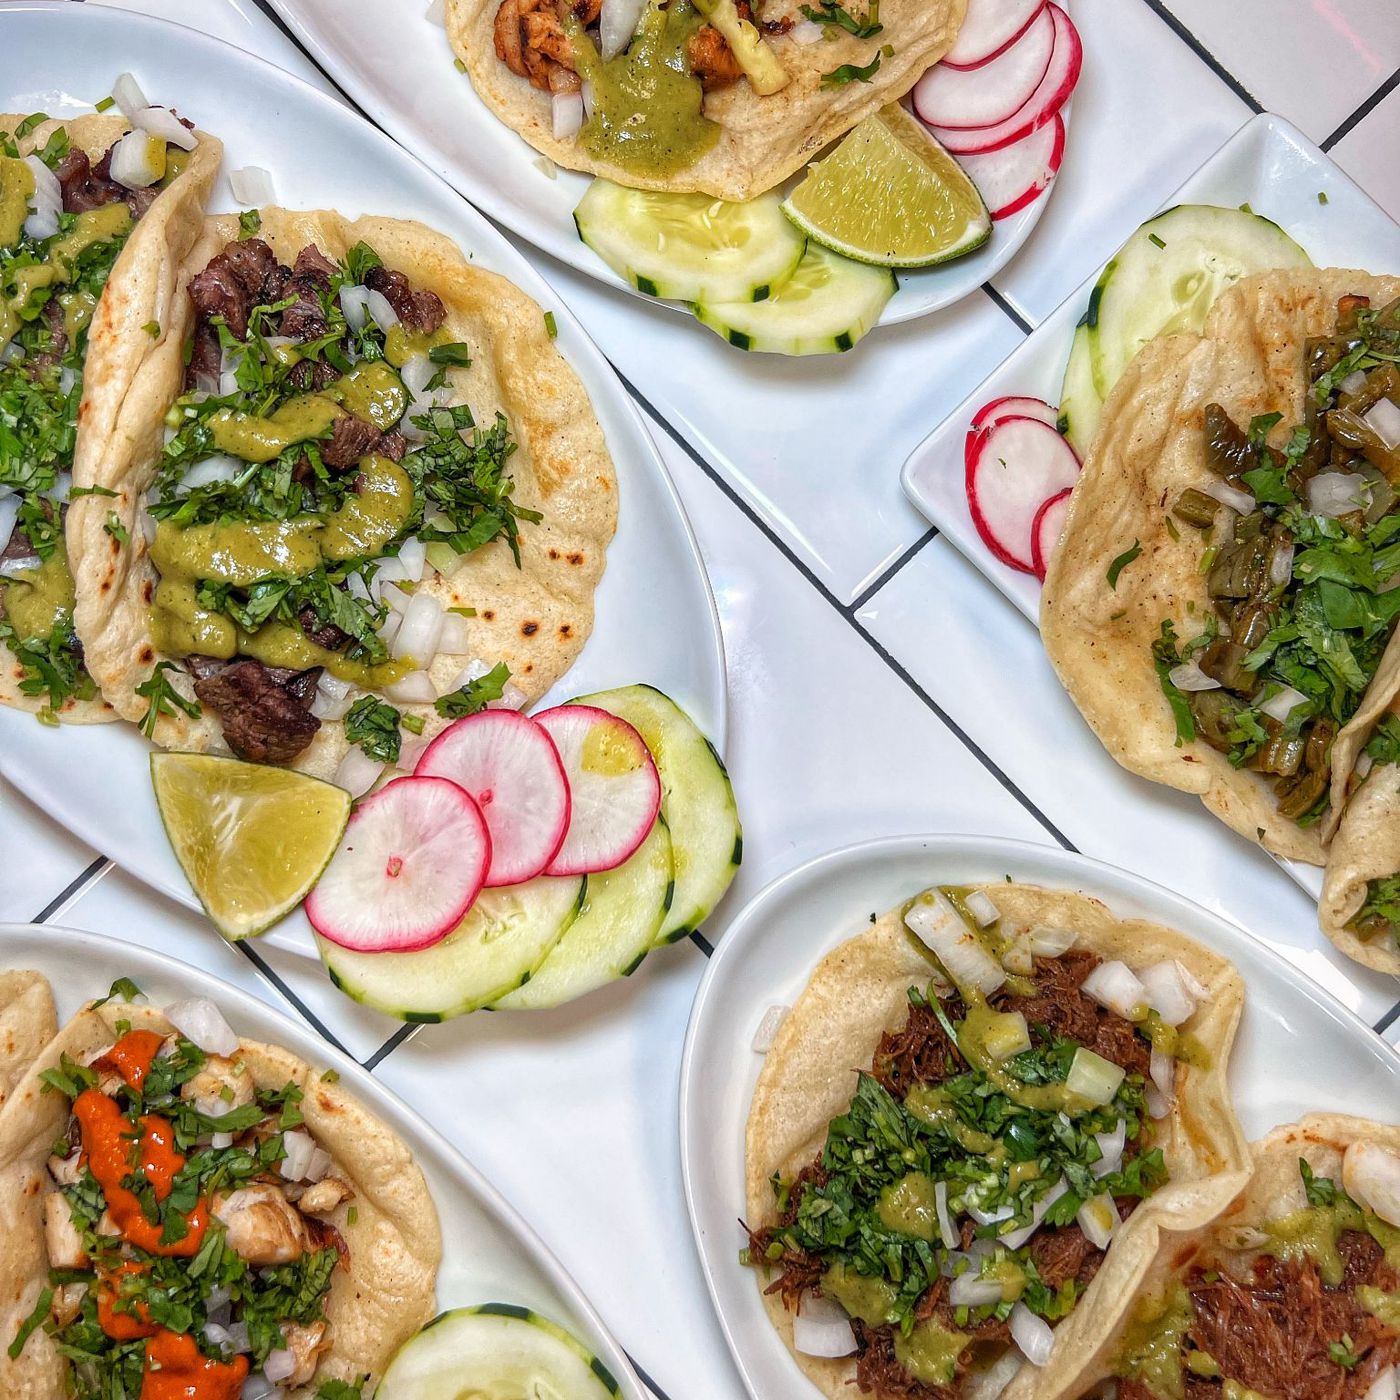 Shaw's Surprise New Taco Shop Swings Open Next to Capo Deli - Eater DC